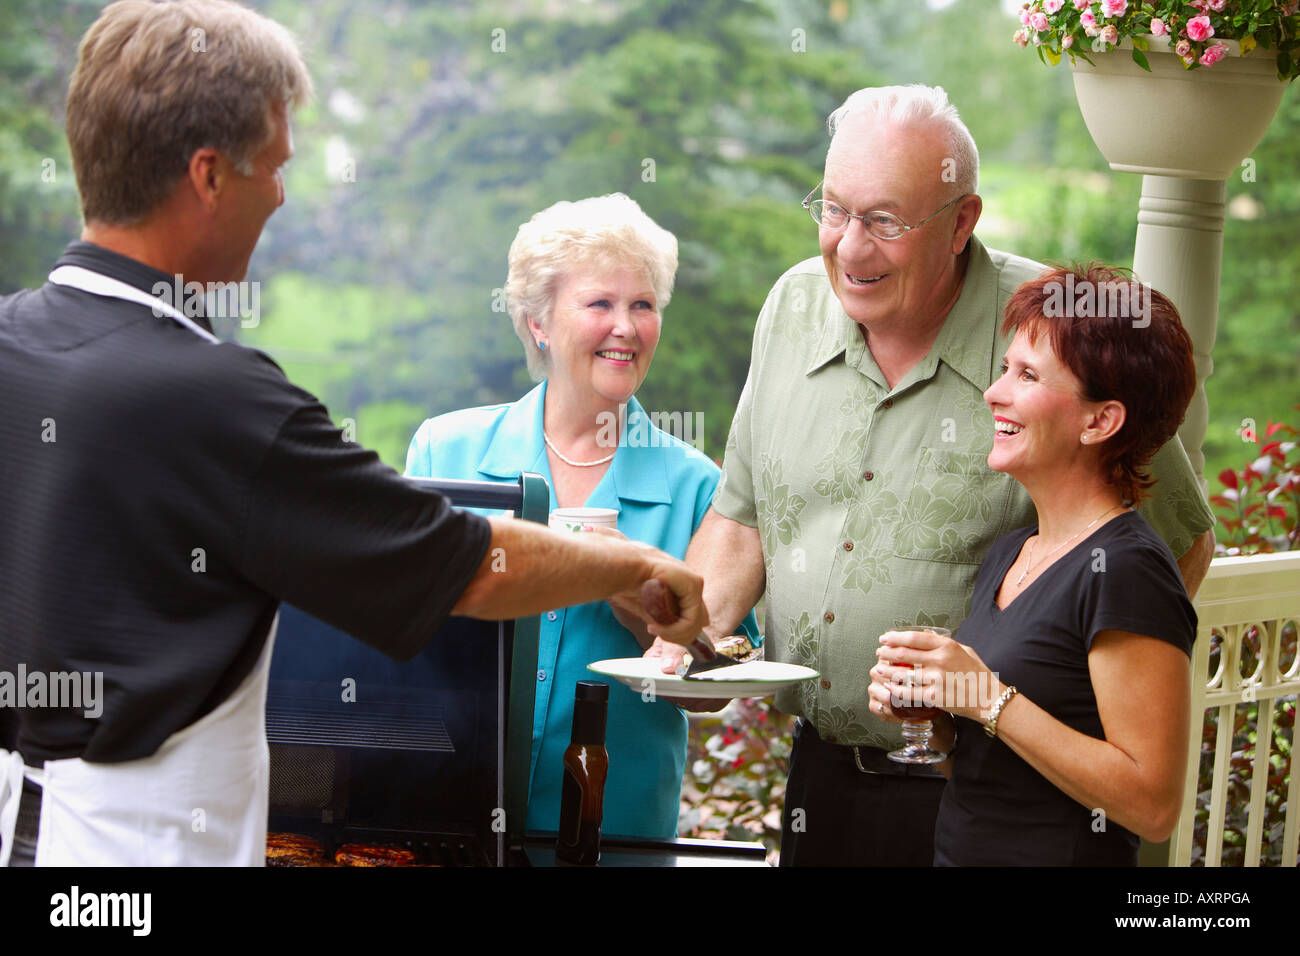 Man barbecuing and serving burgers Stock Photo